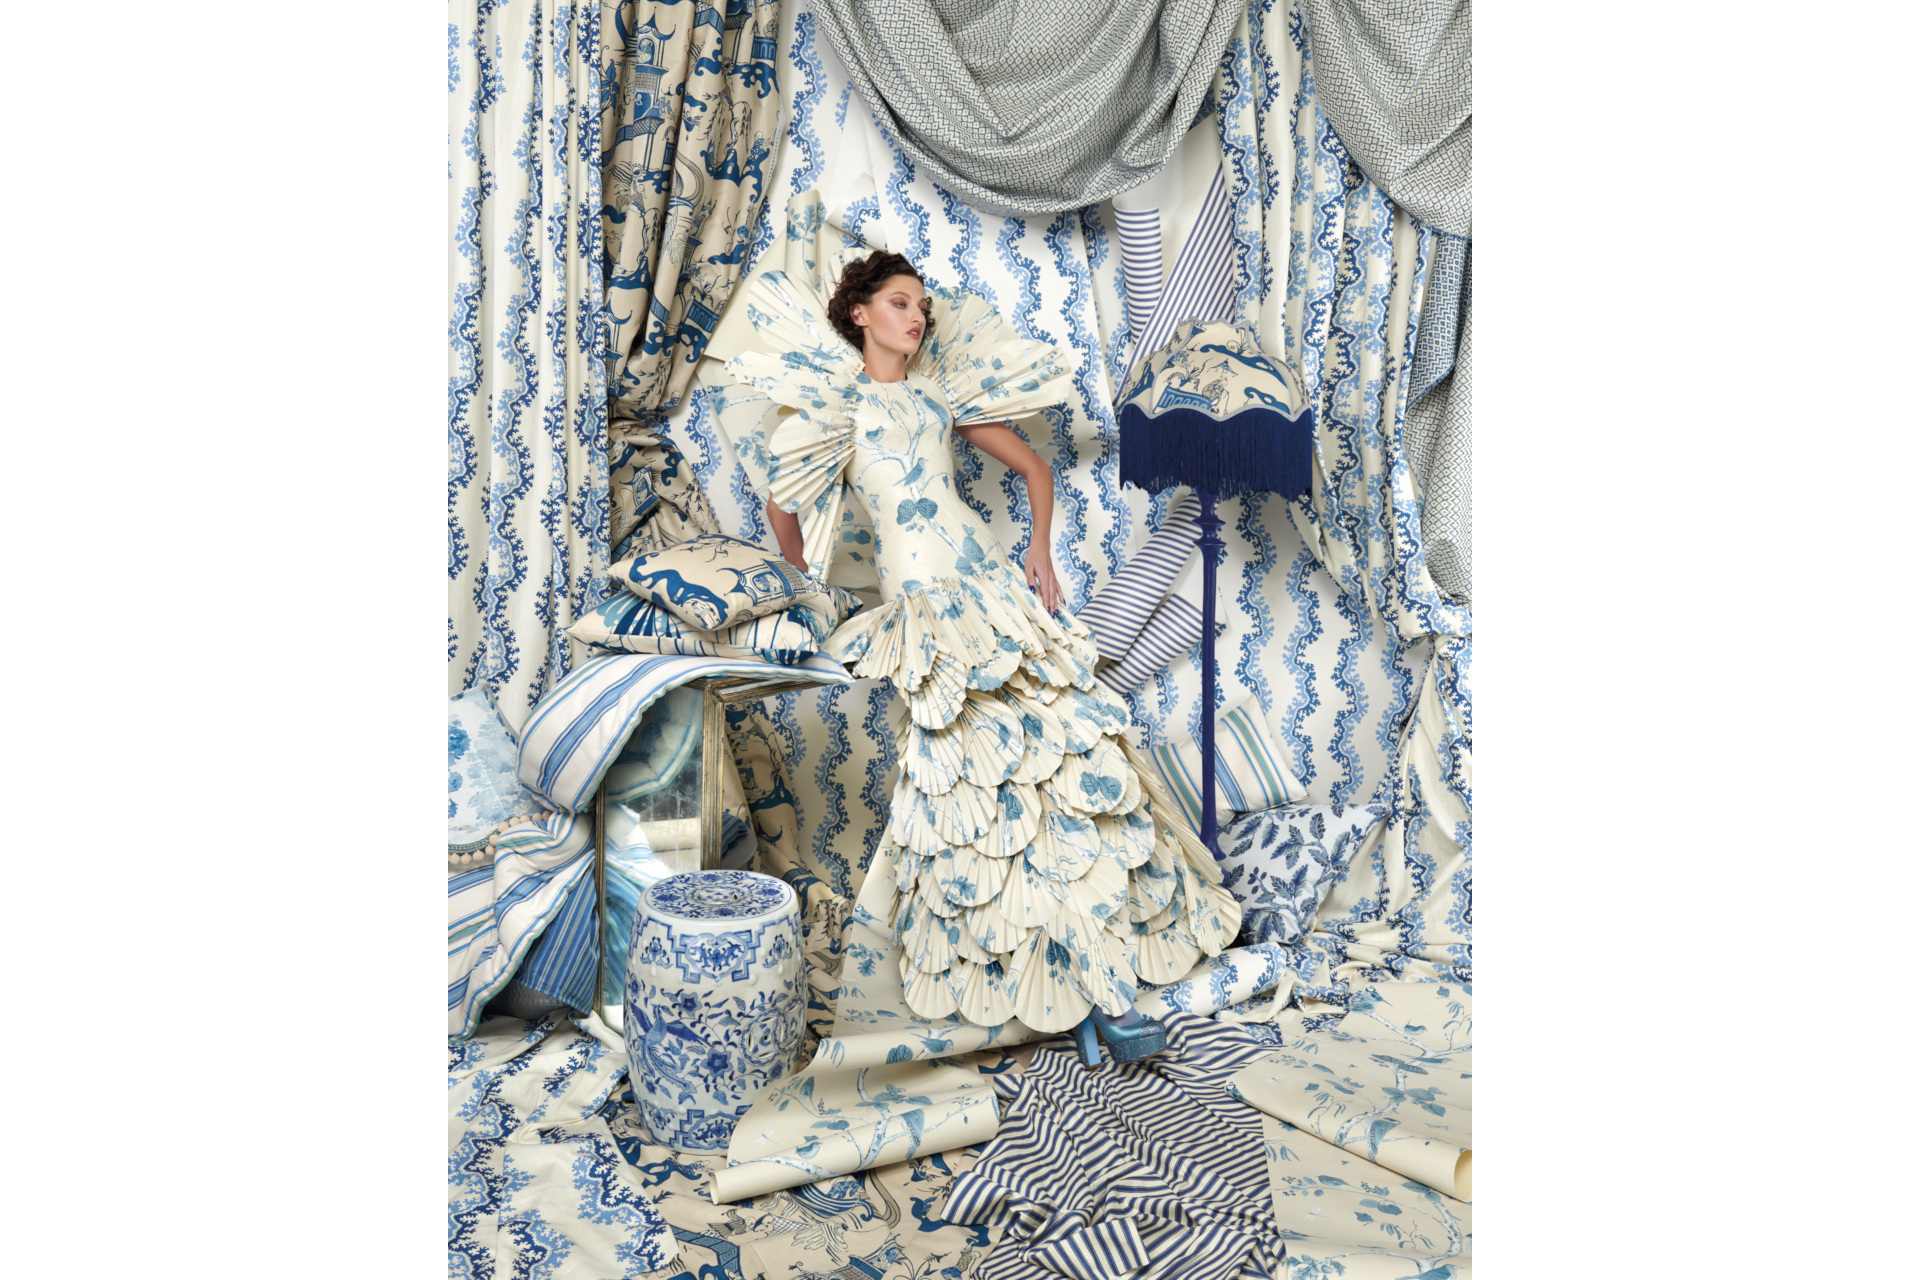 Woman in white and blue dress surrounded by blue curtains and fabric 